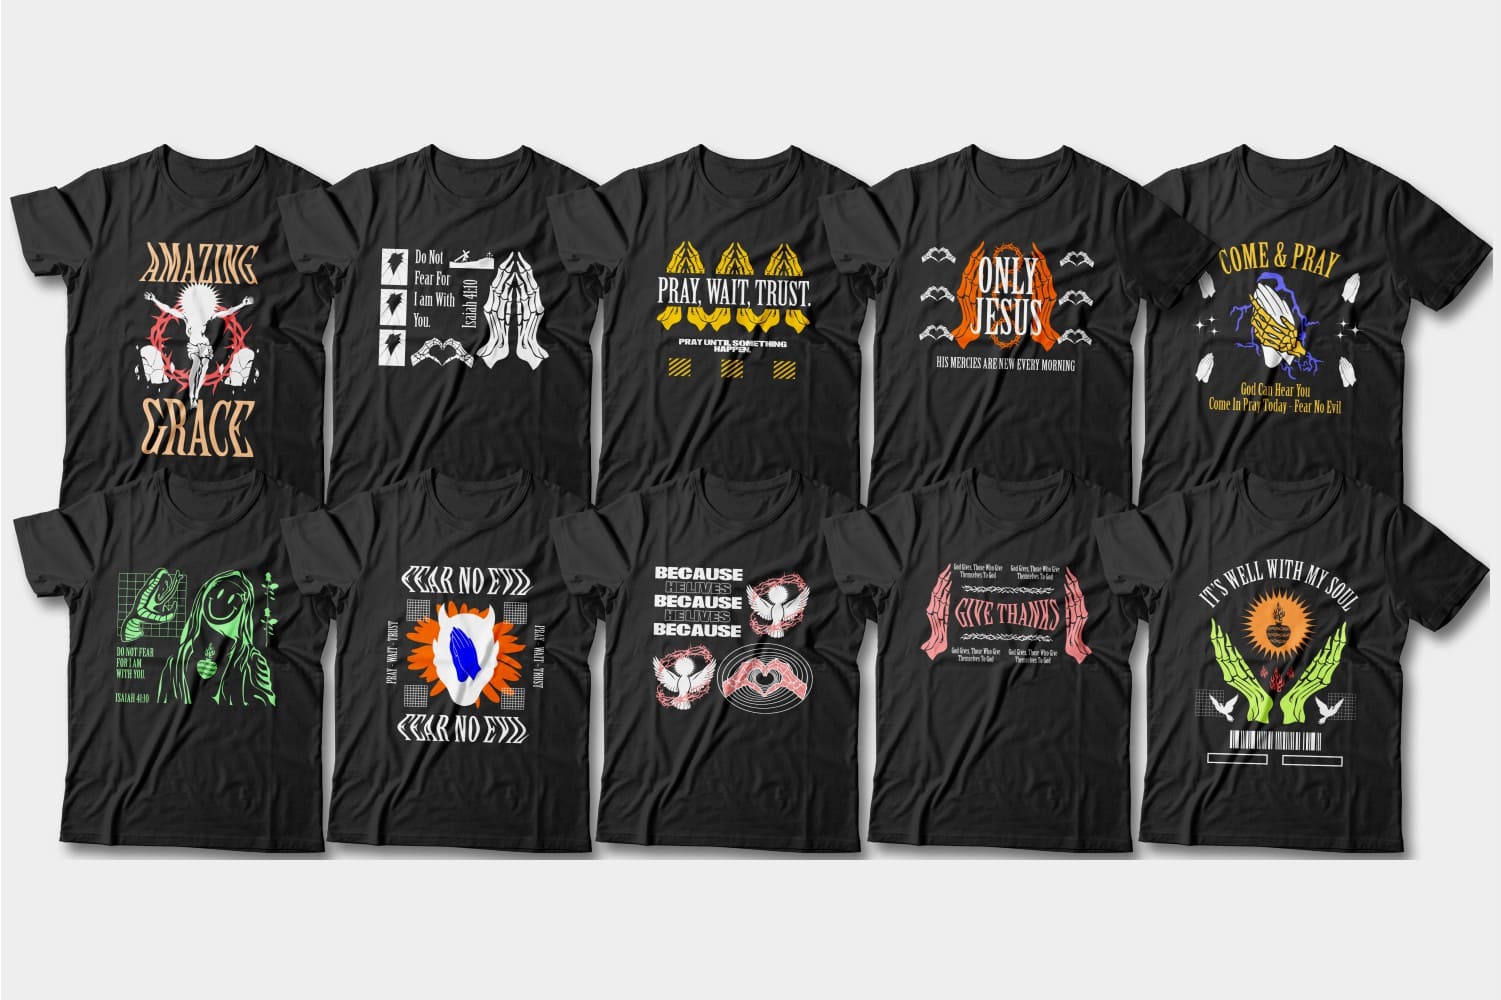 Black t-shirts with modern Christian graphics.